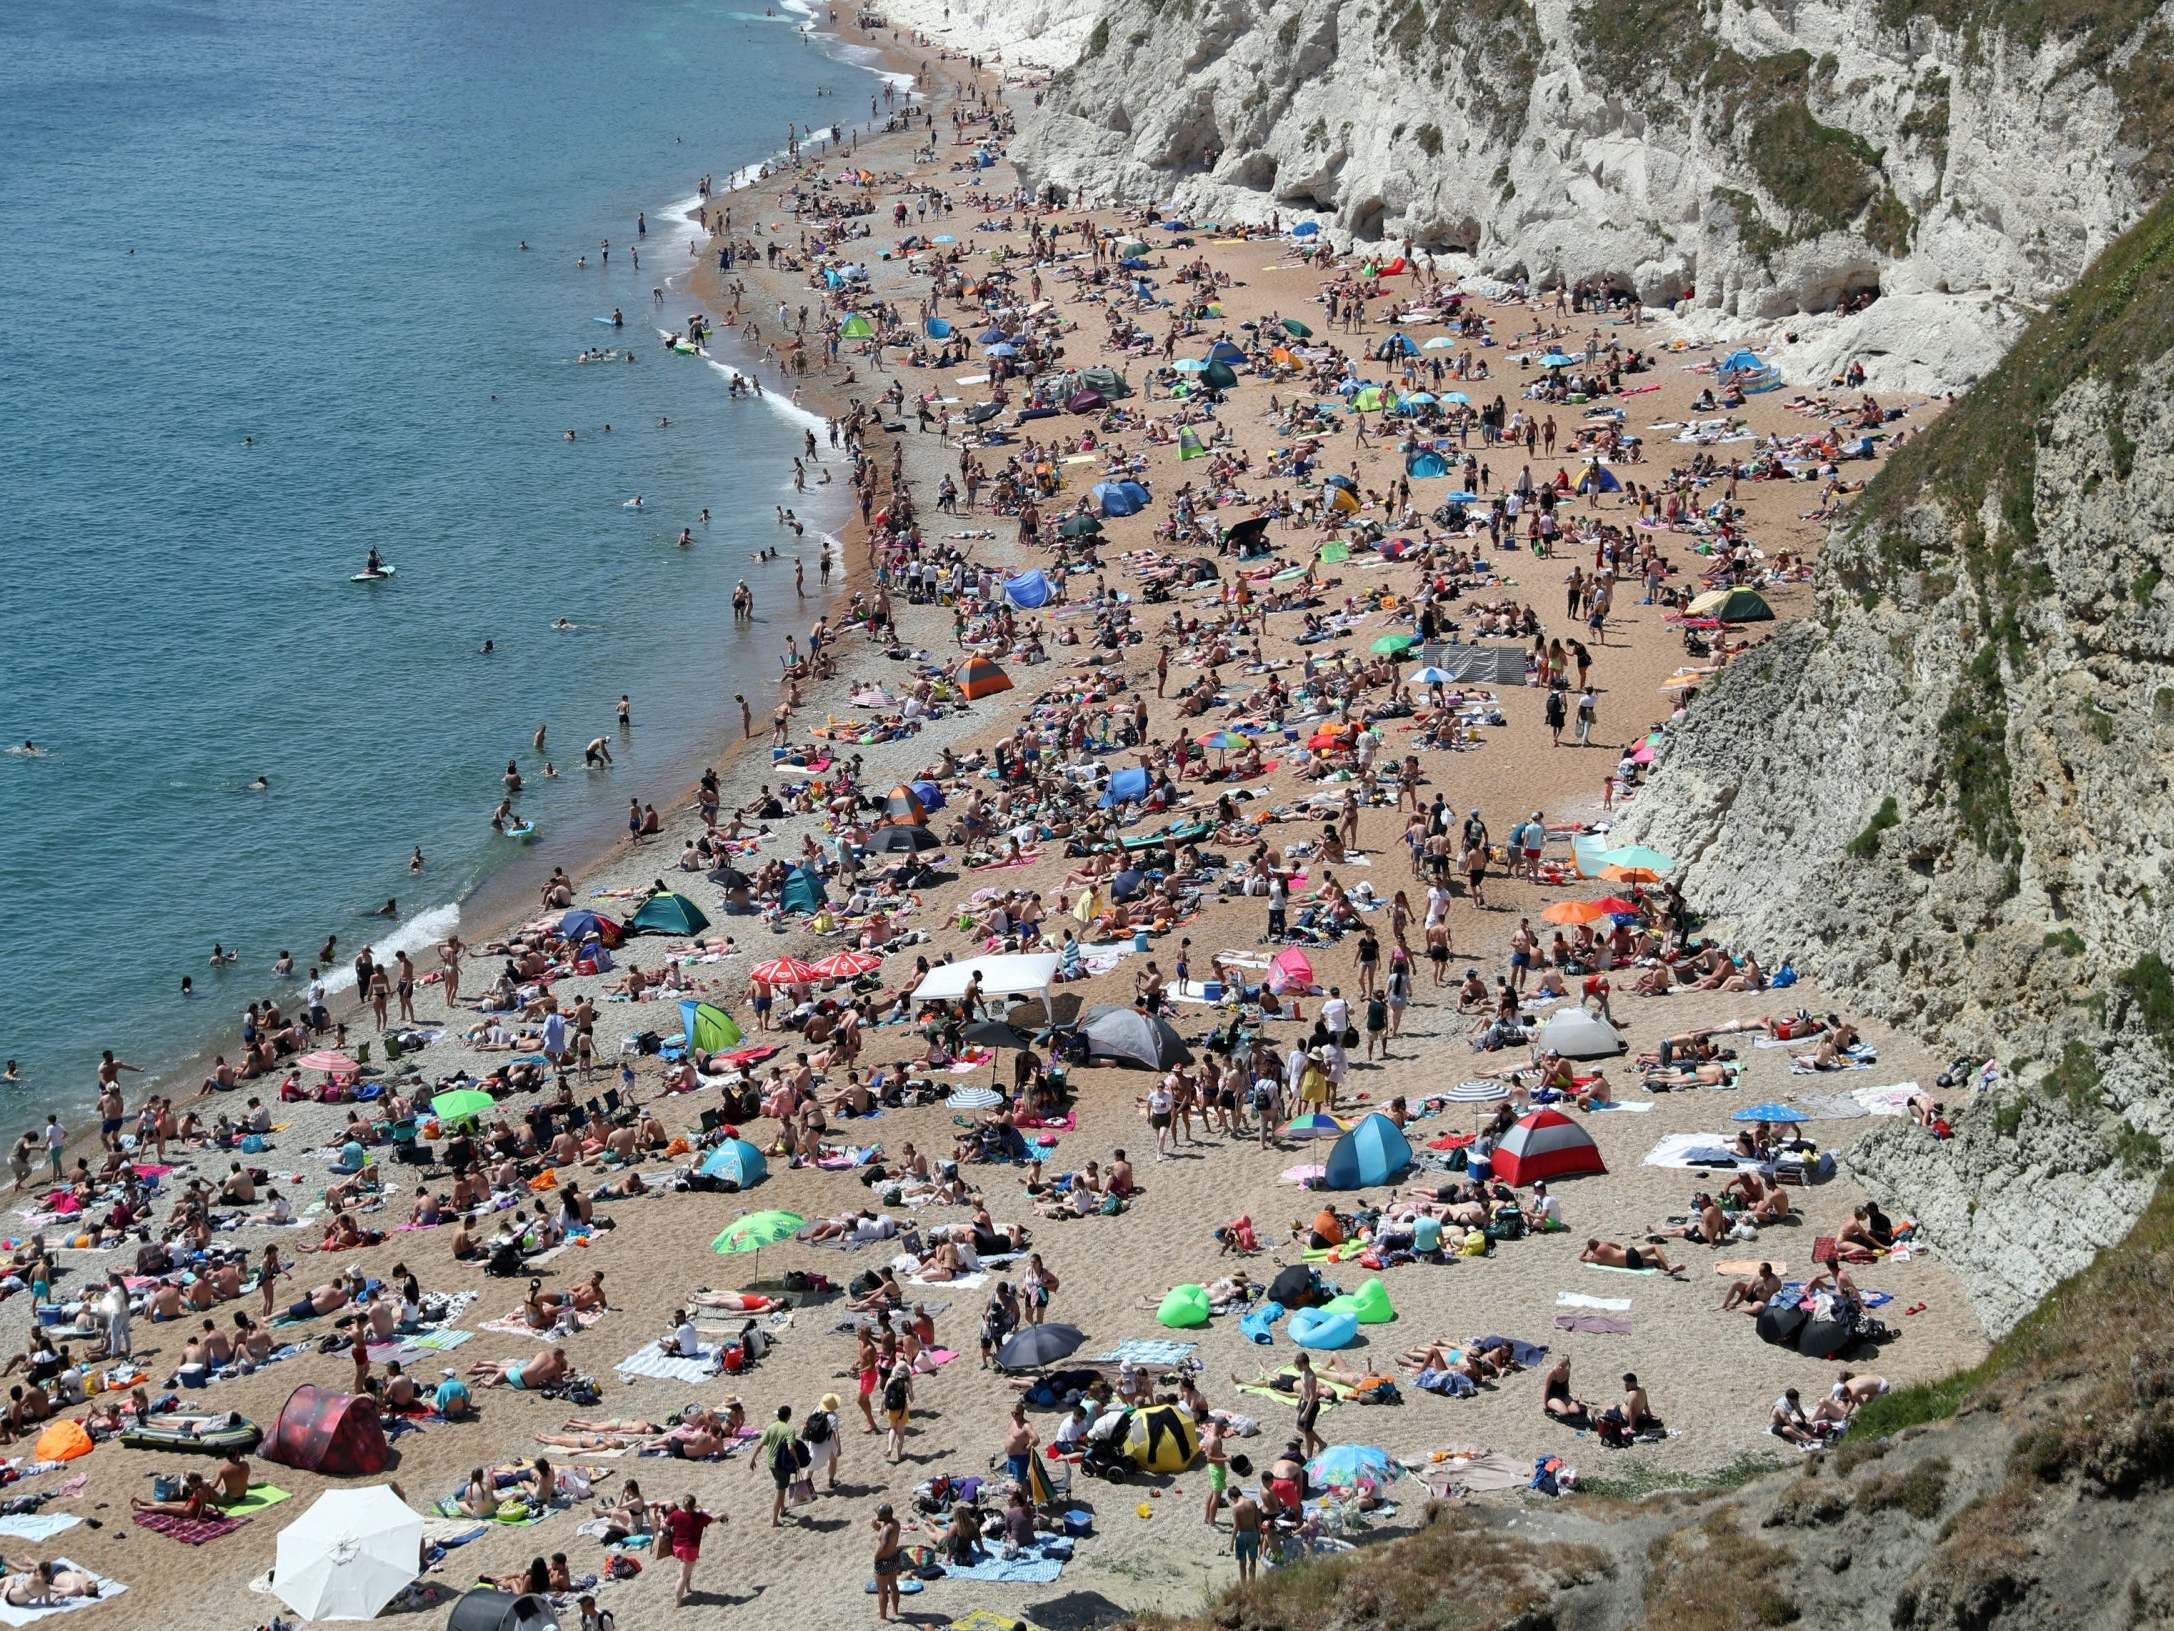 The beach at Durdle Door was crowded over the summer